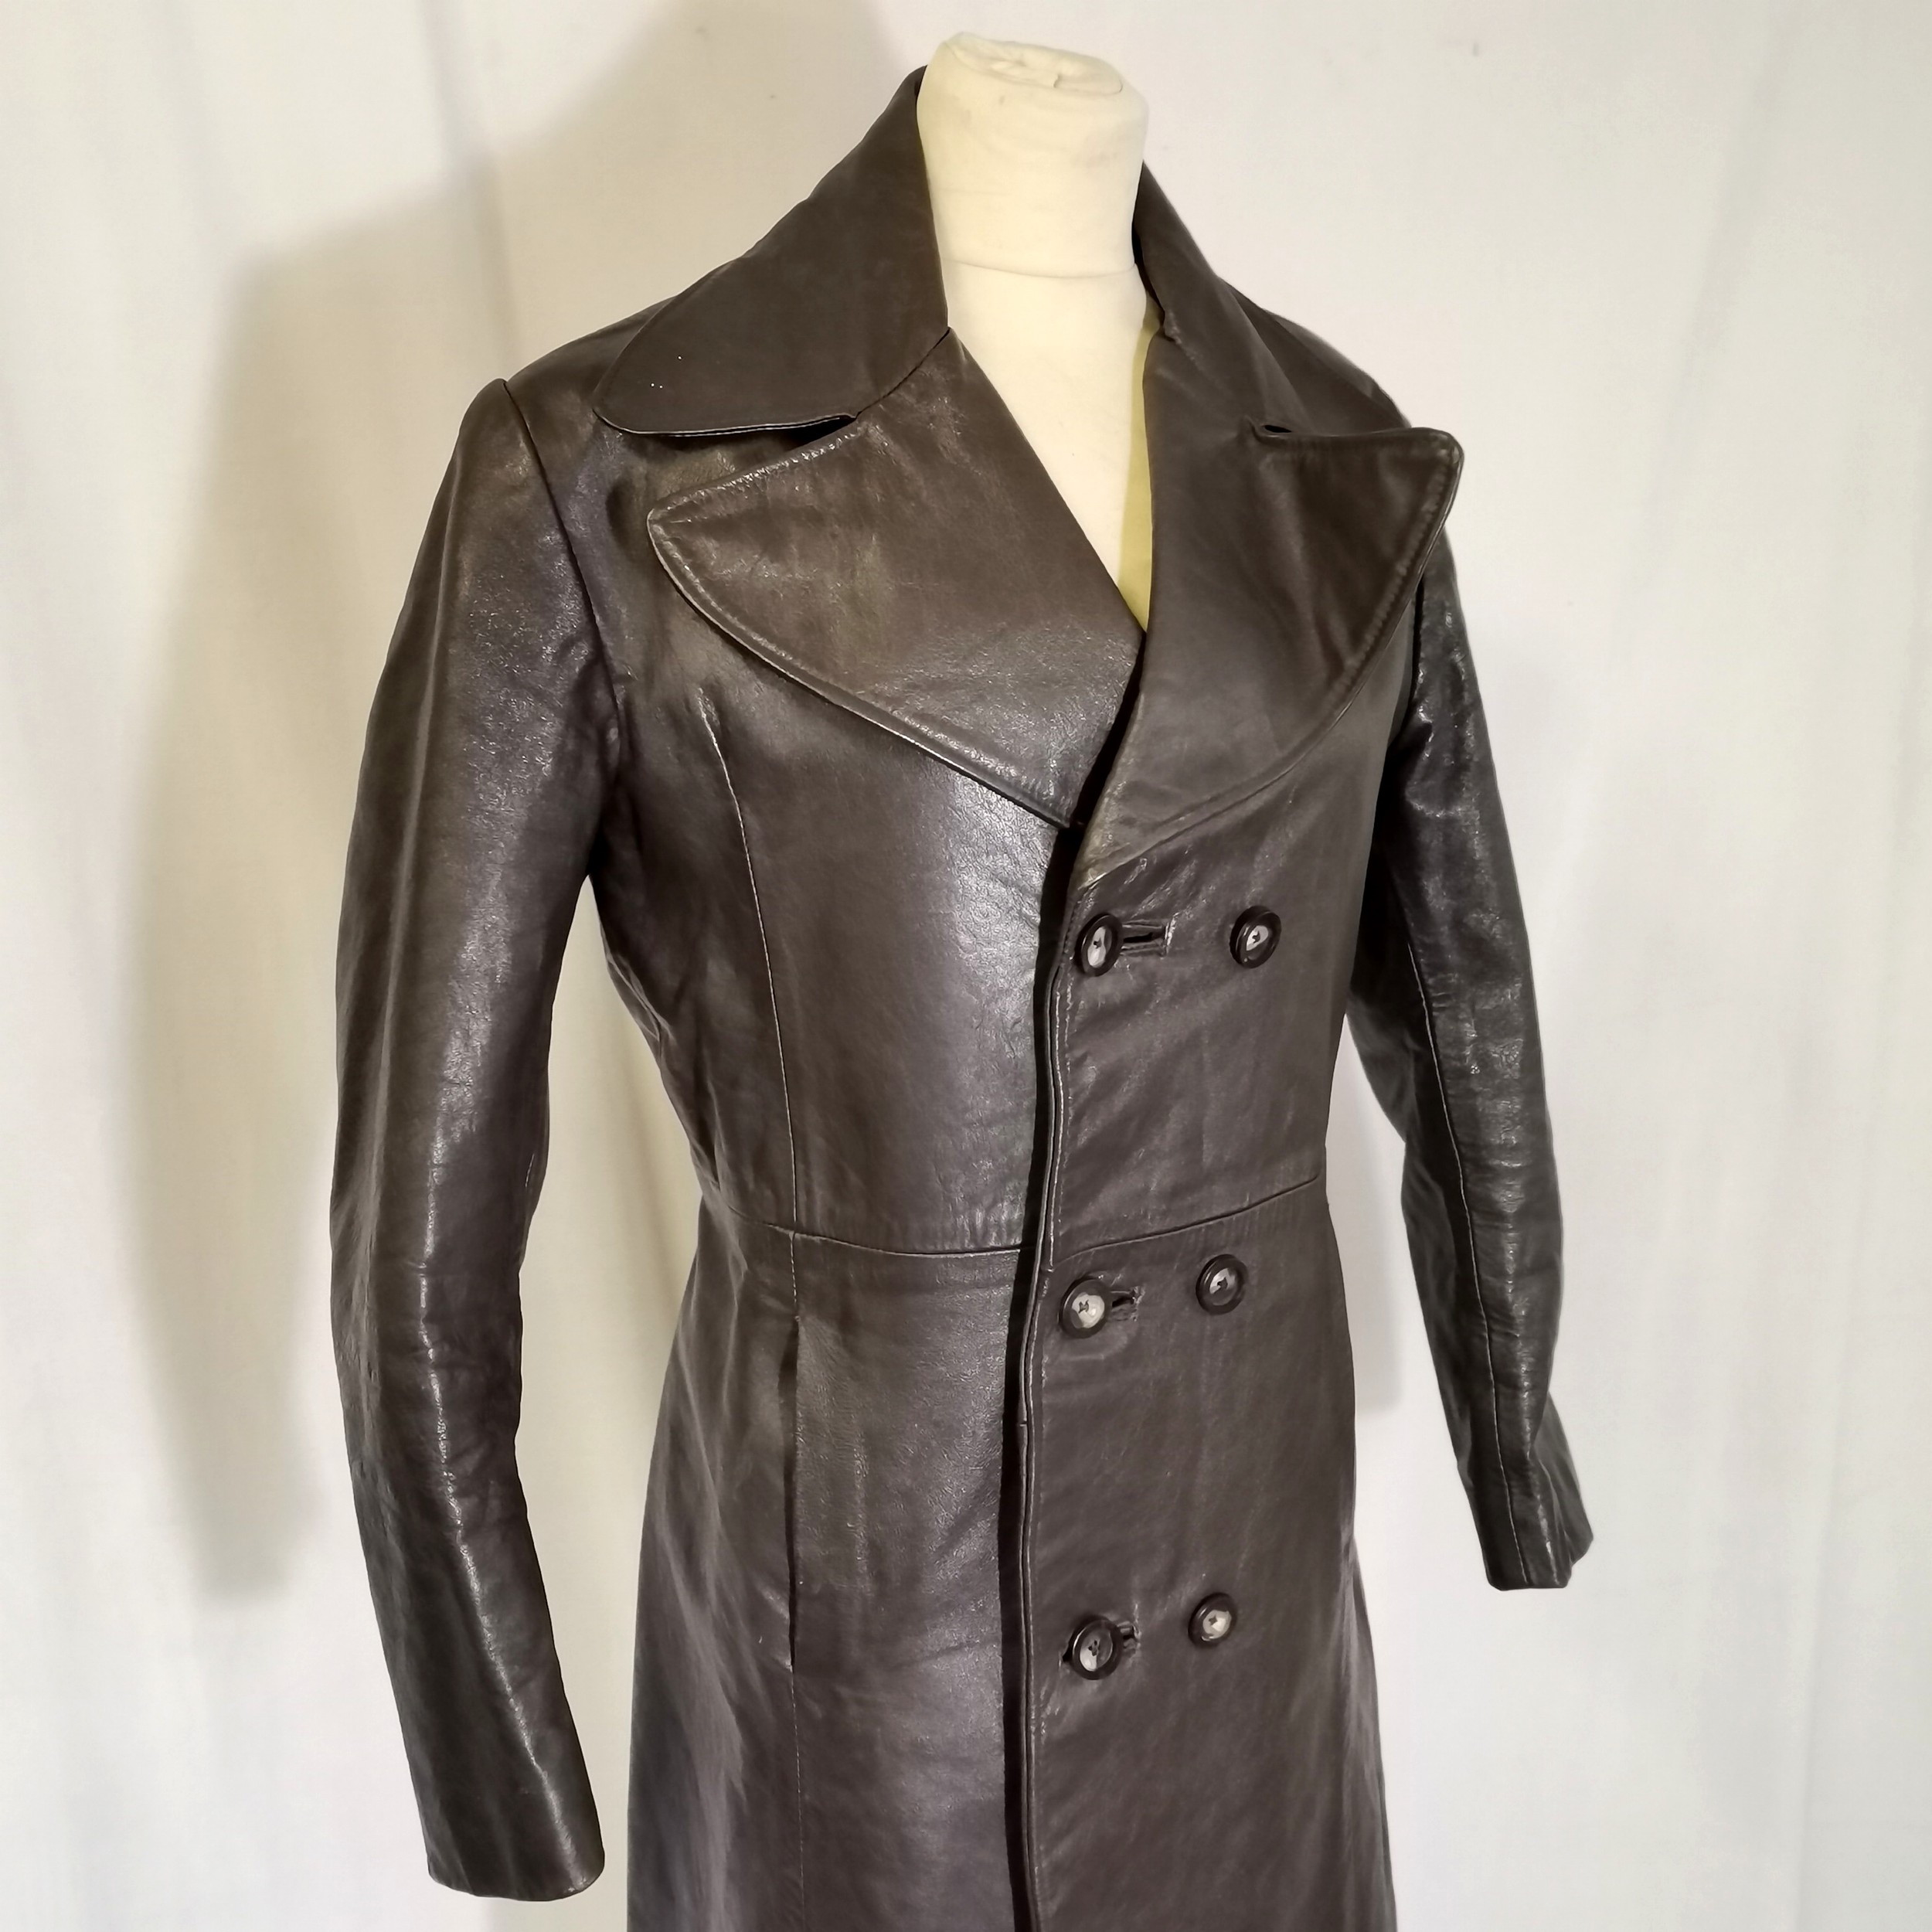 Vintage leather coat with leather strap tie back - 110cm chest - good used condition - Image 3 of 3